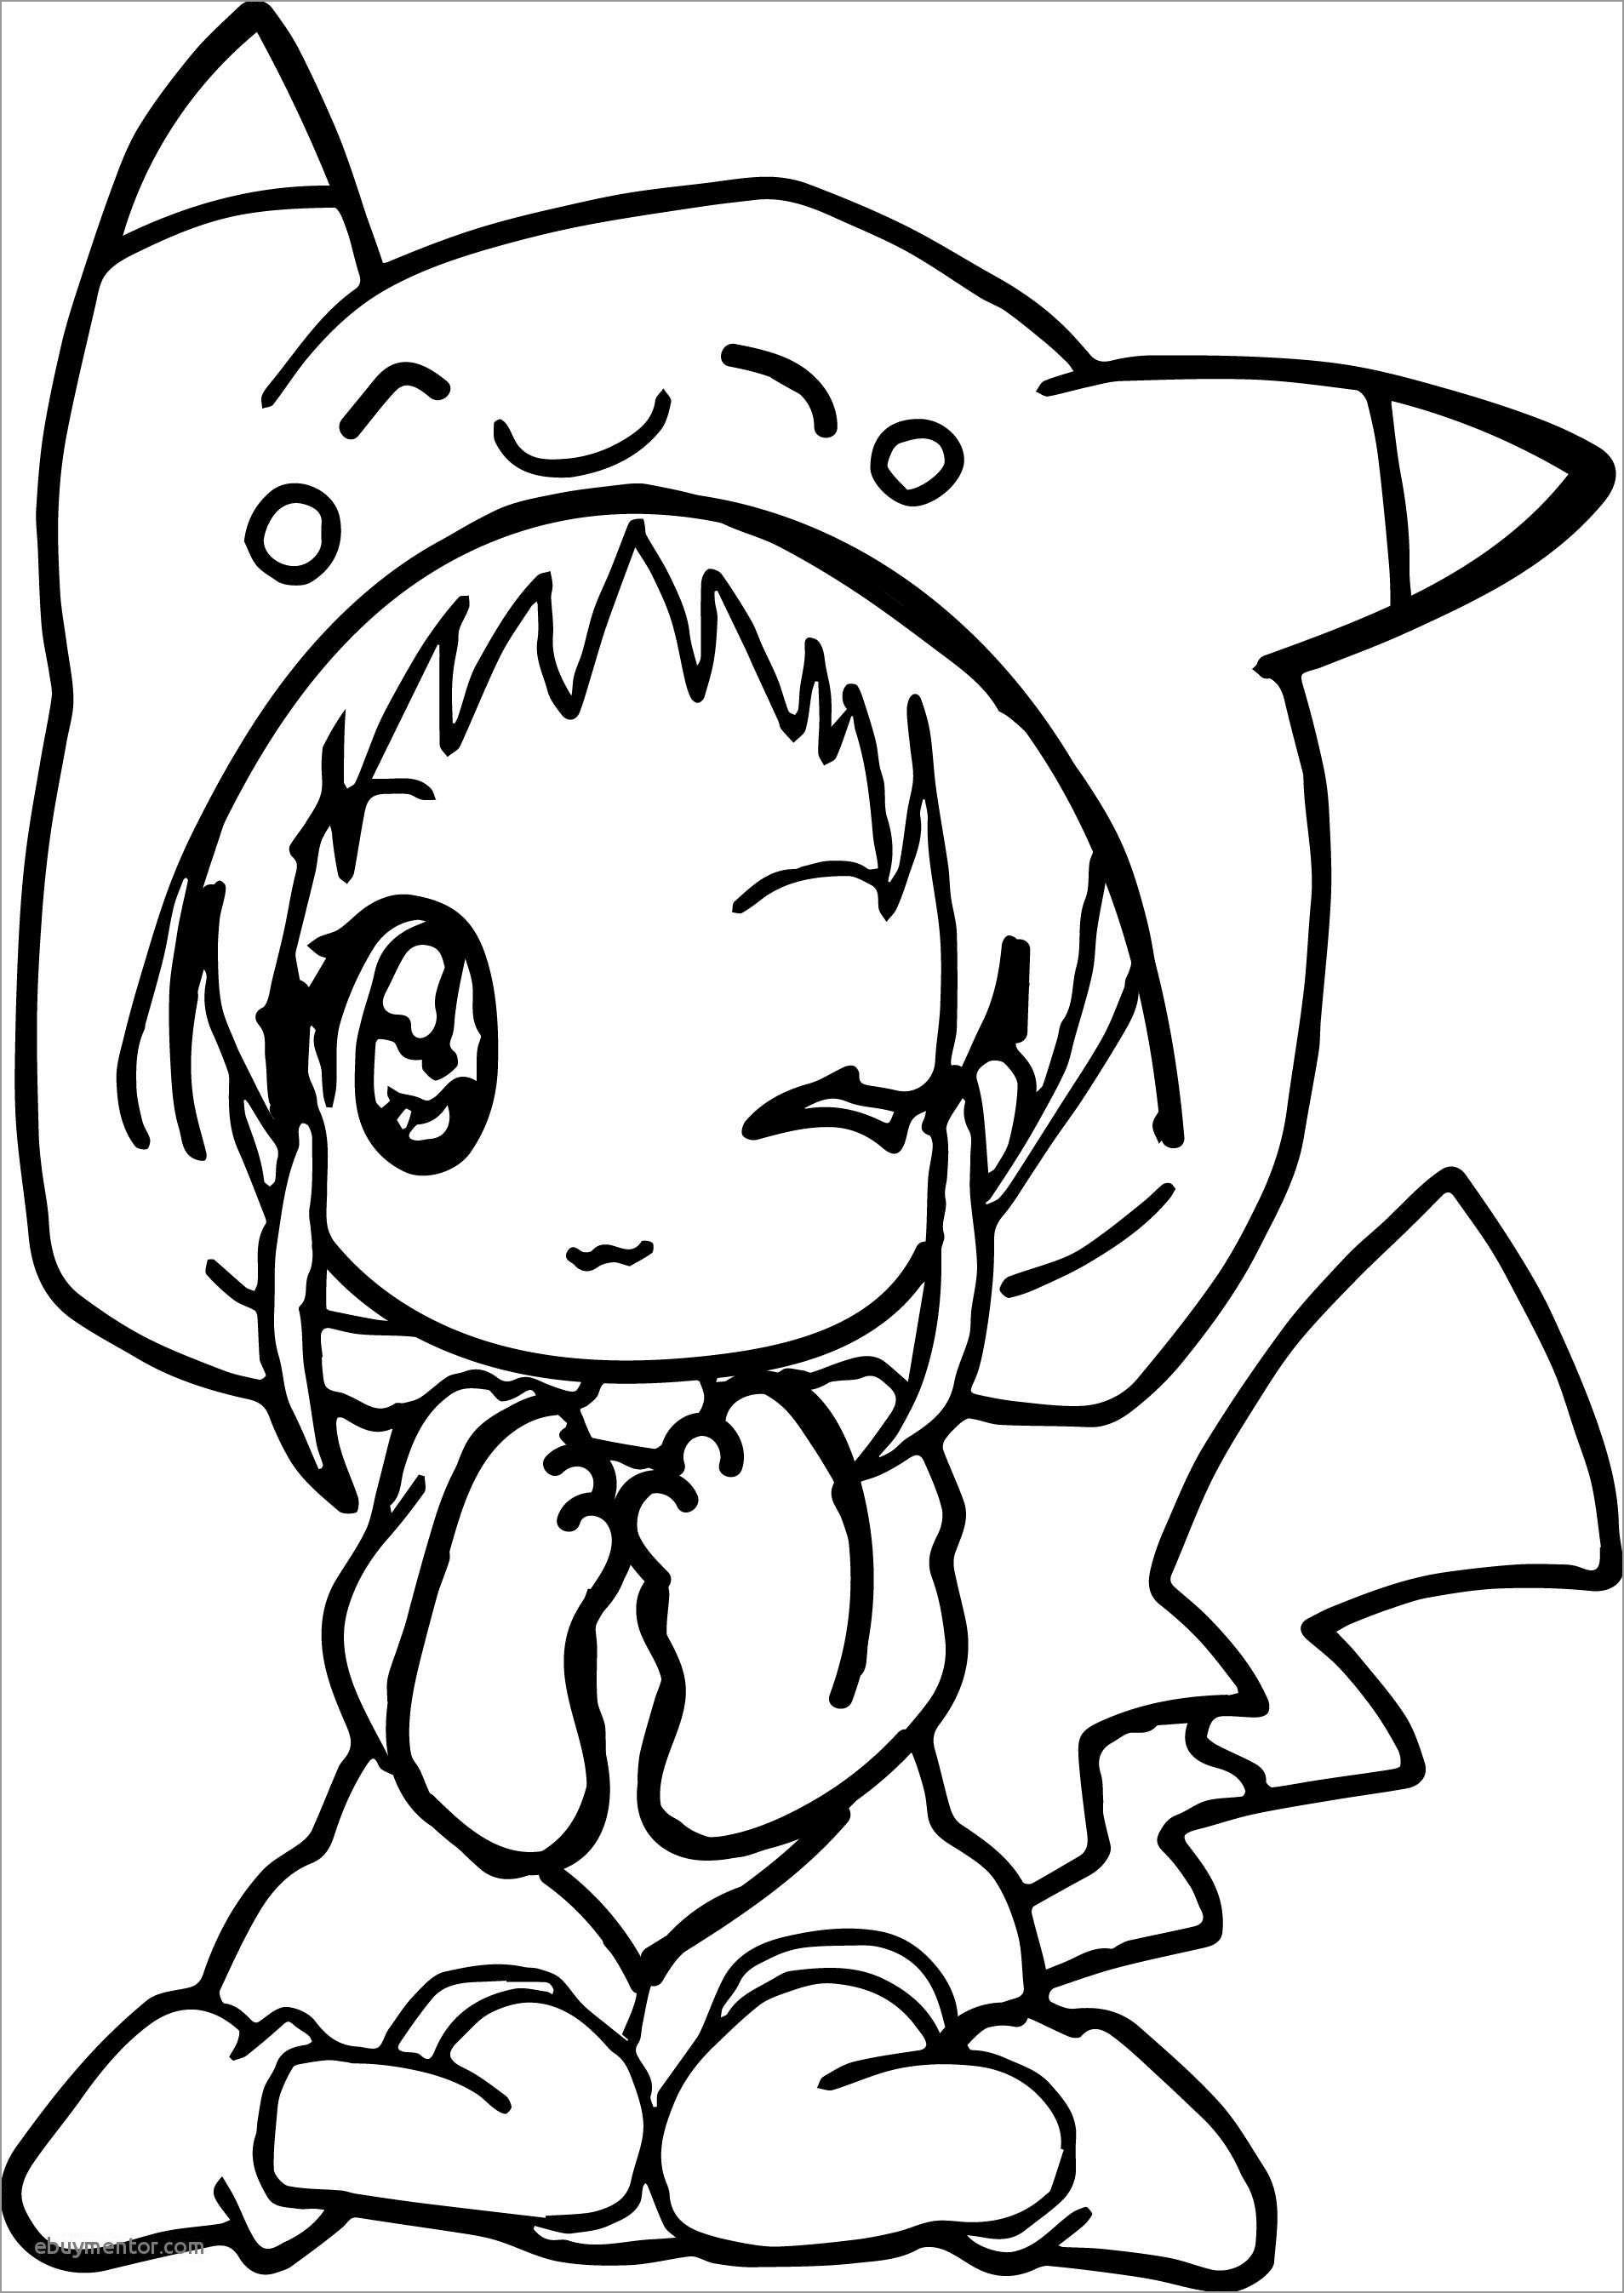 Cute Anime Chibi Girl Coloring Pages - ColoringBay